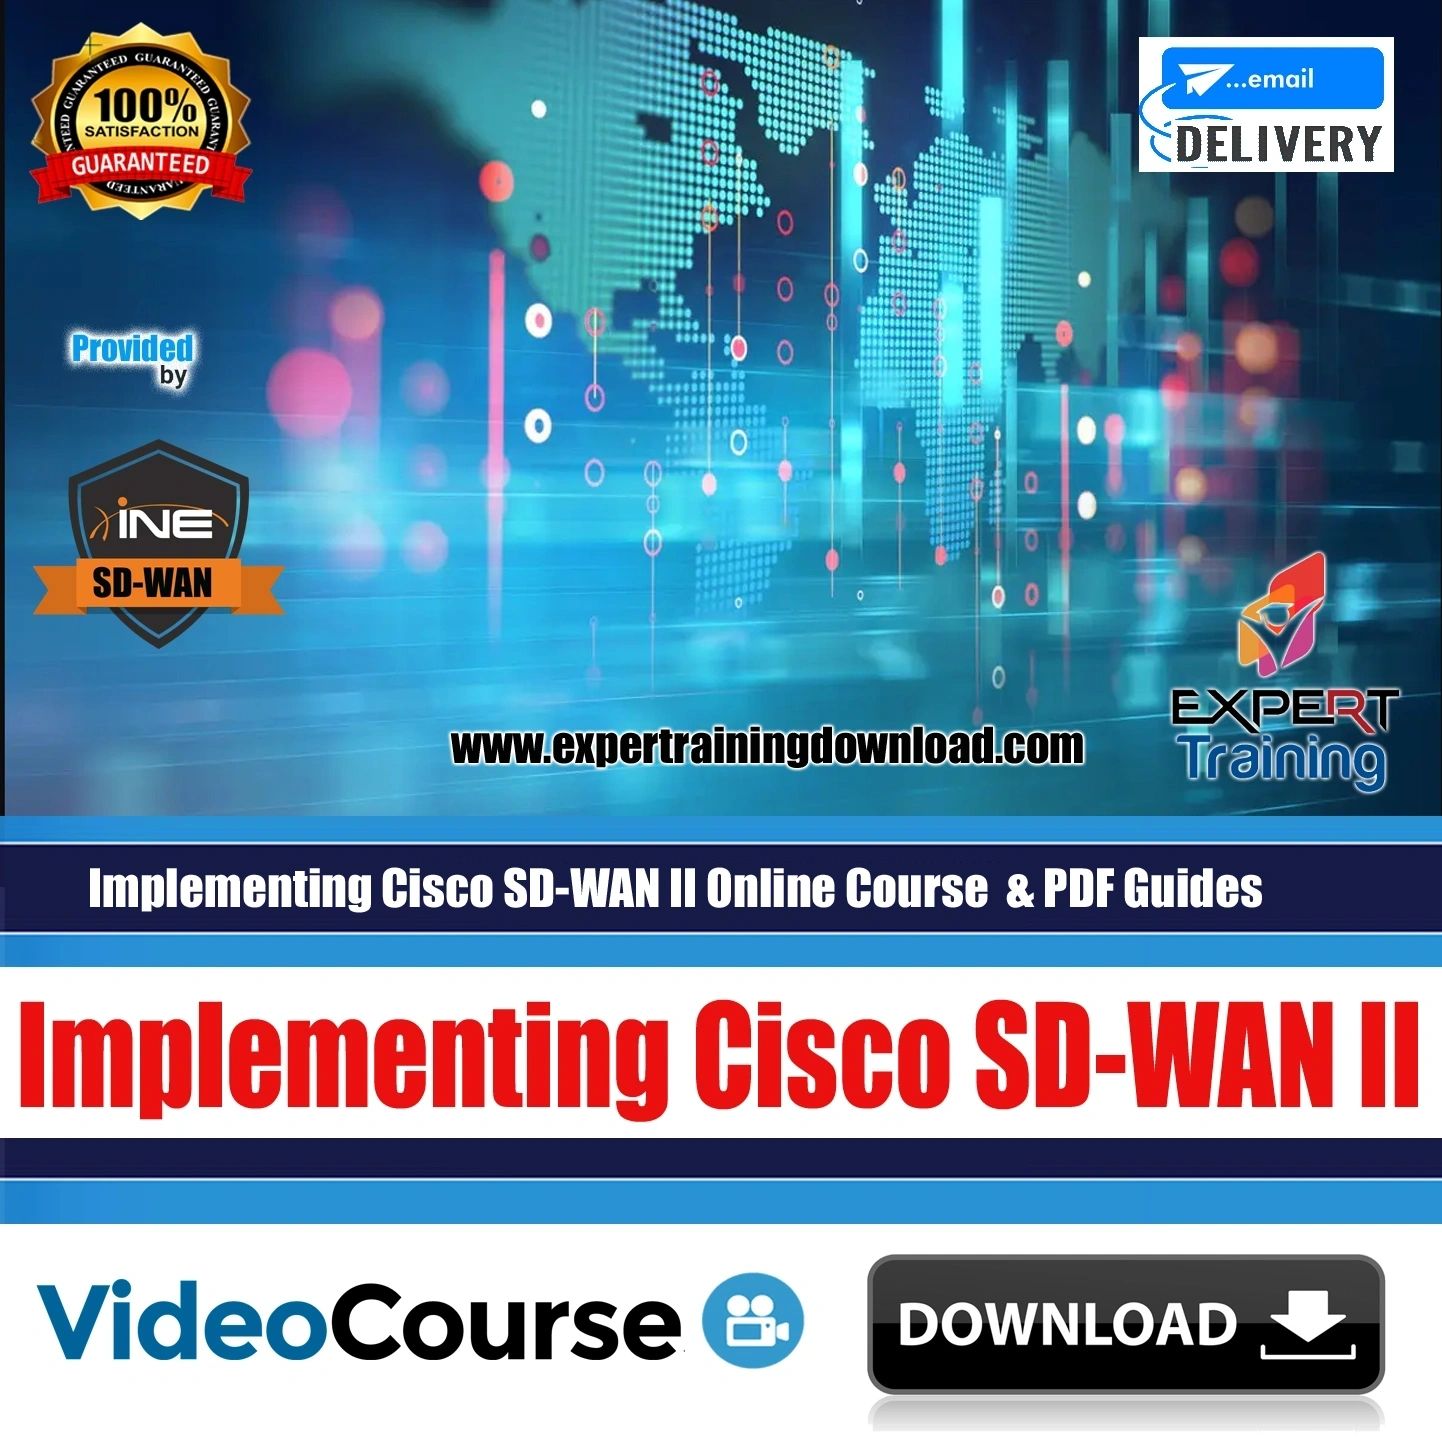 Implementing Cisco SD-WAN II Online Course & SD-WAN PDF Guides